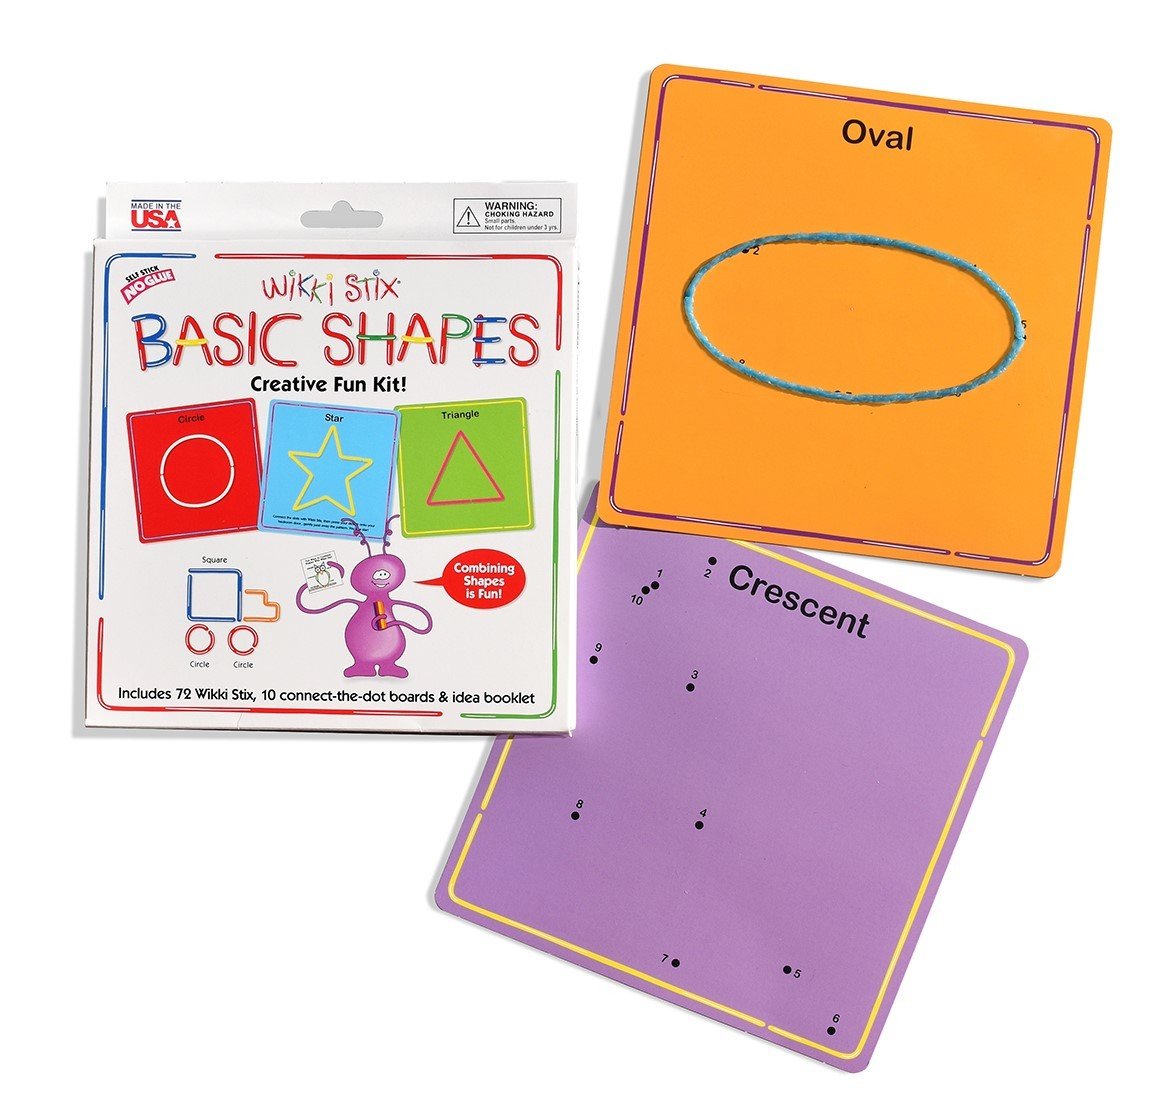 Wikki Stix Numbers & Counting Cards